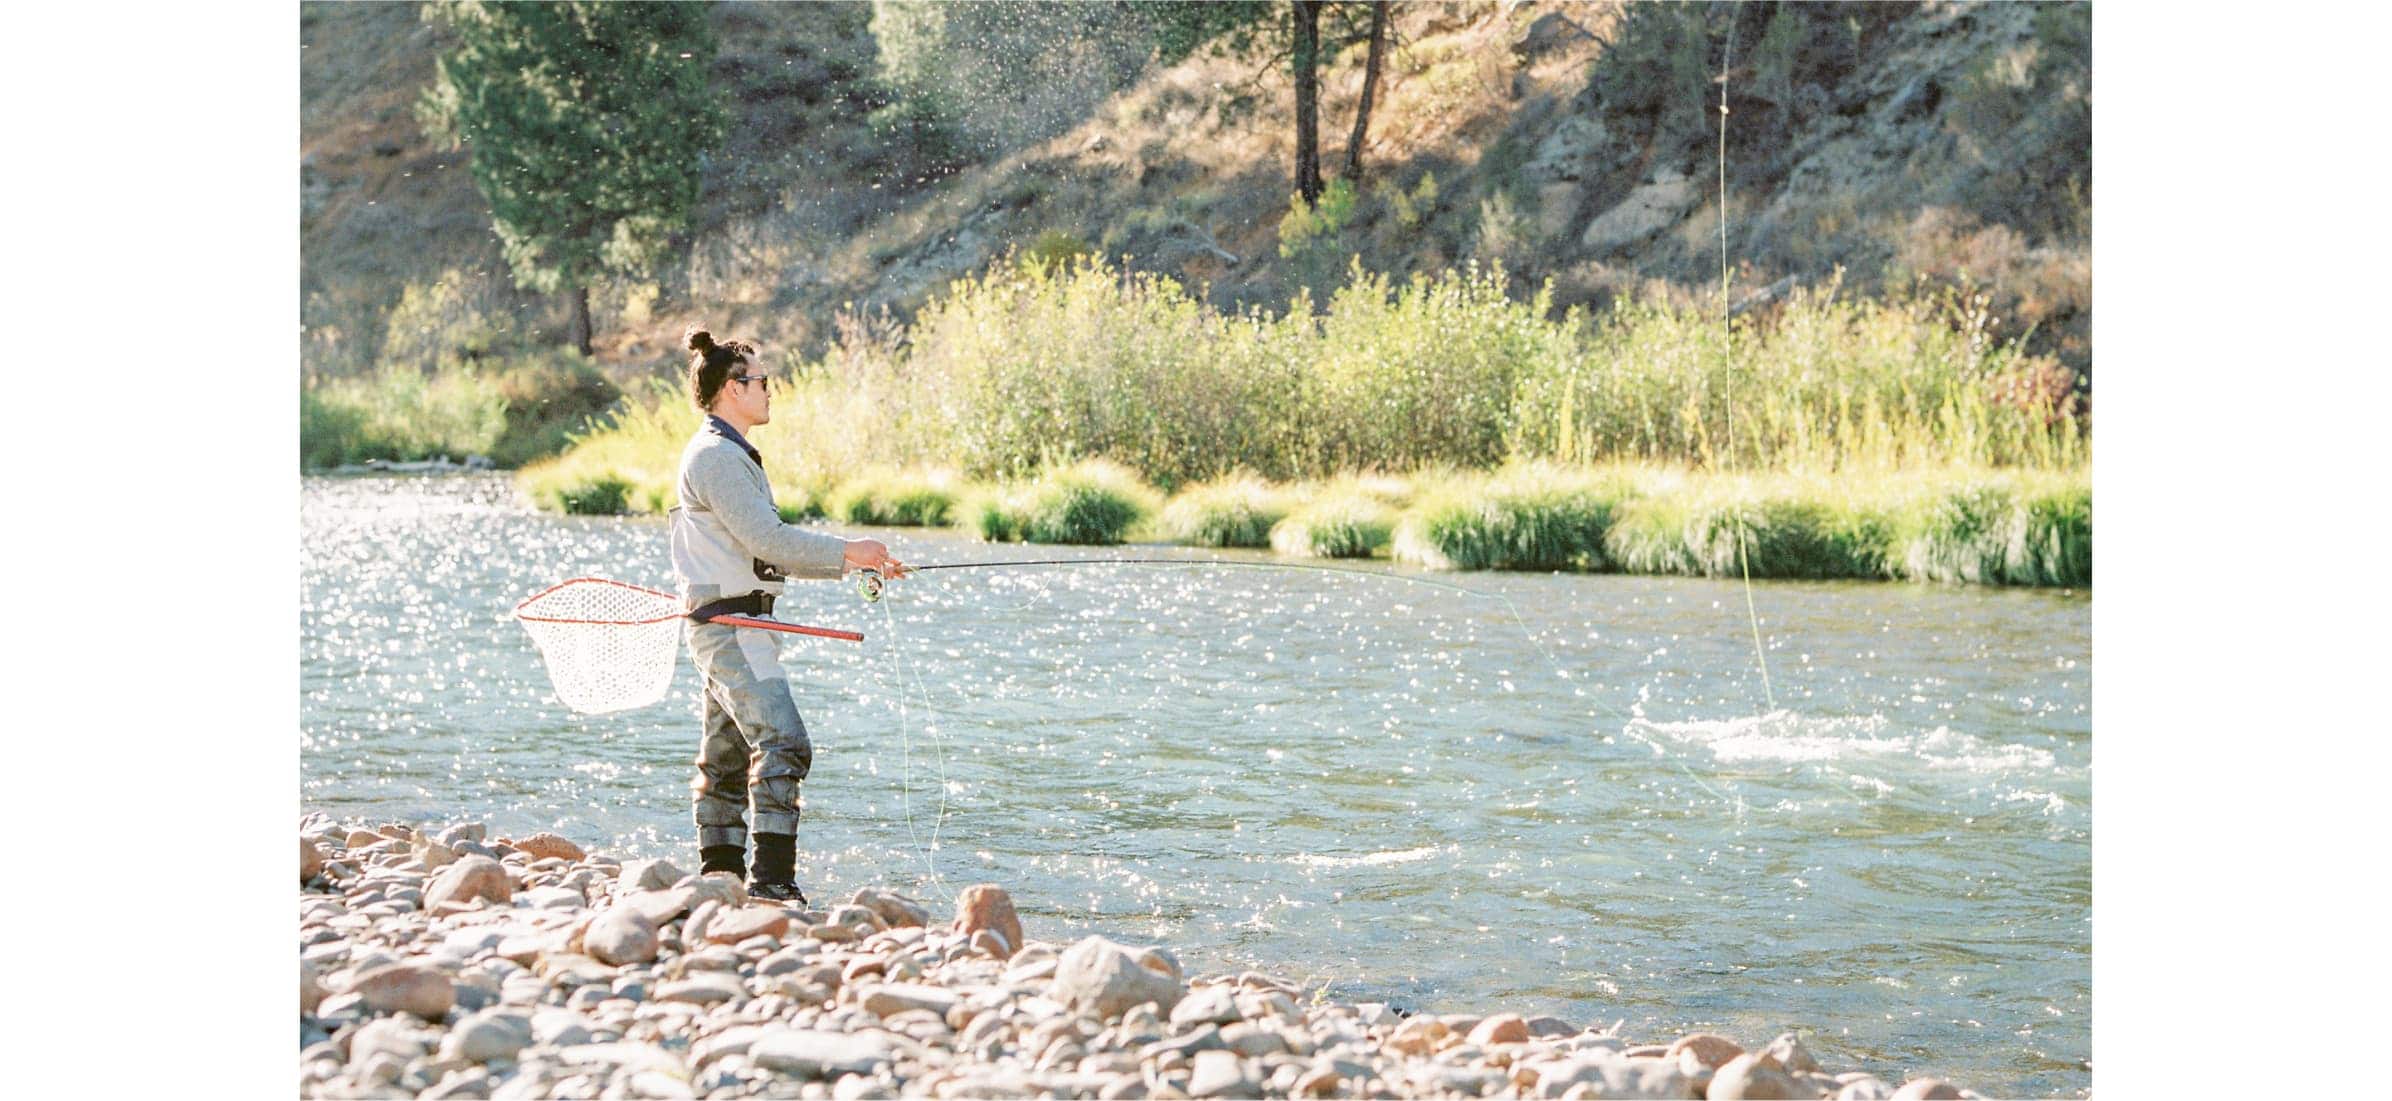 A person fishing in a river.